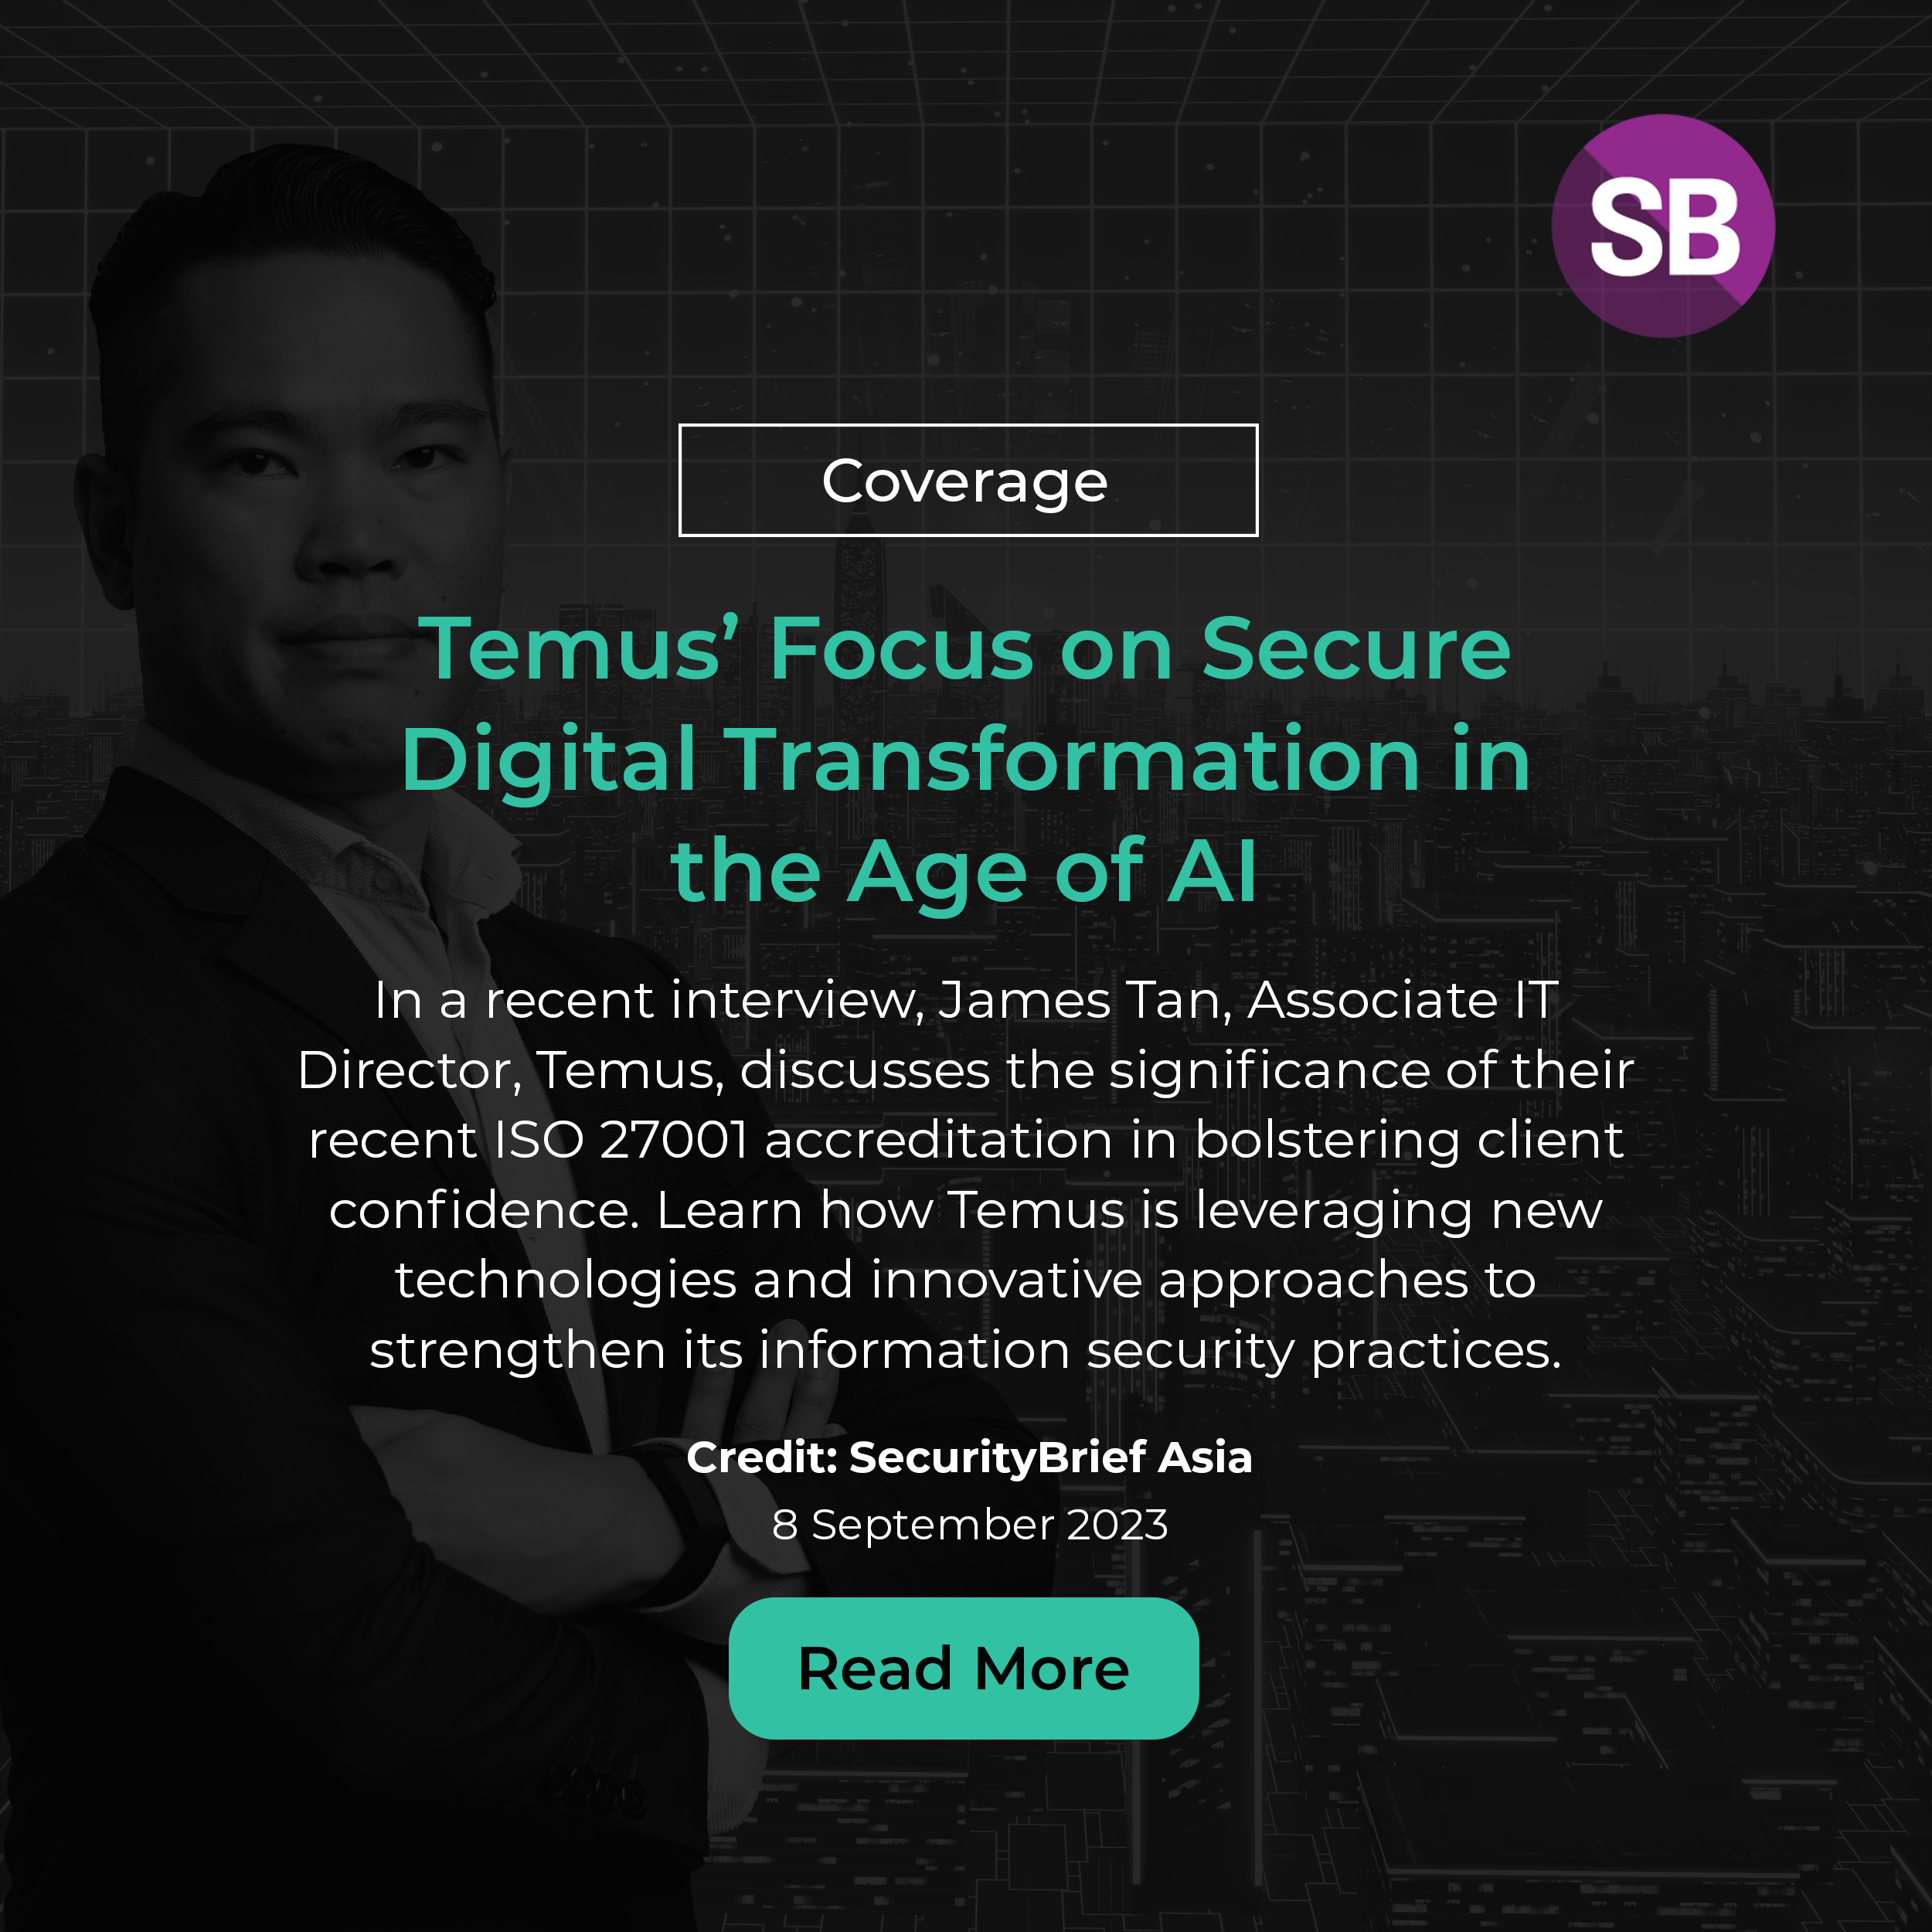 [Coverage] Temus’ Focus on Secure Digital Transformation in the Age of AI